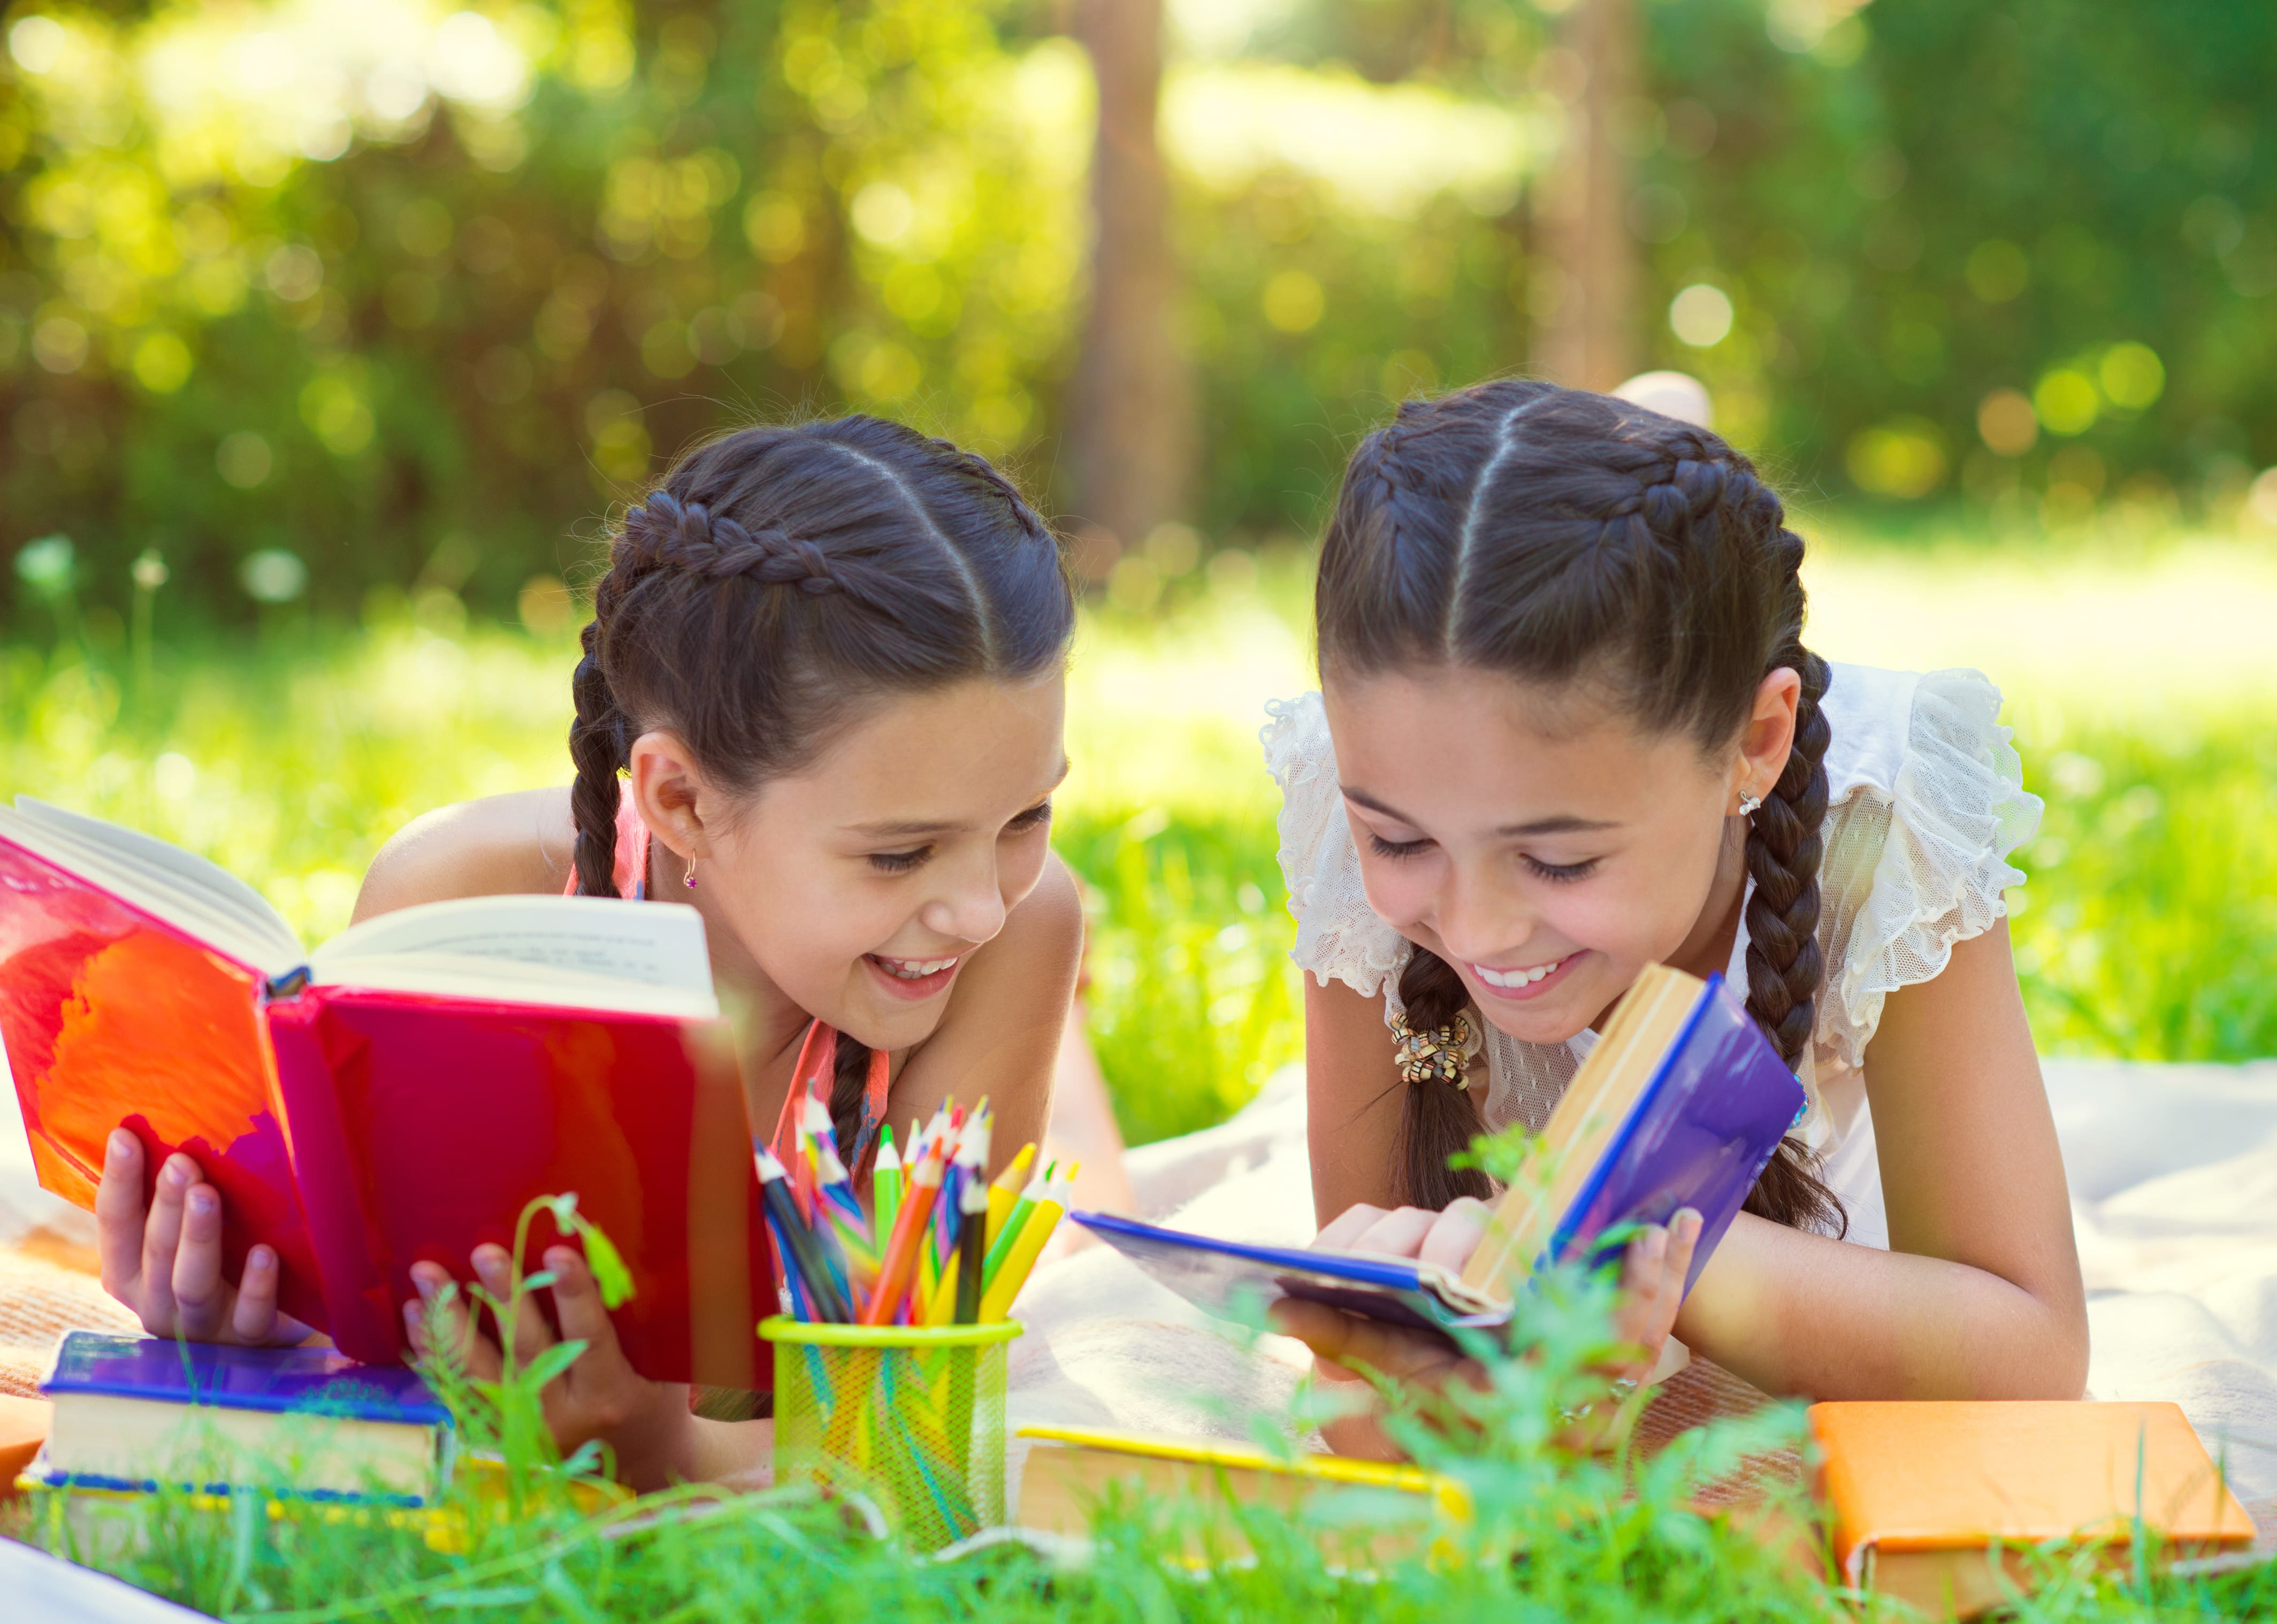 Two elementary age female students laying outside in a grassy field reading books.